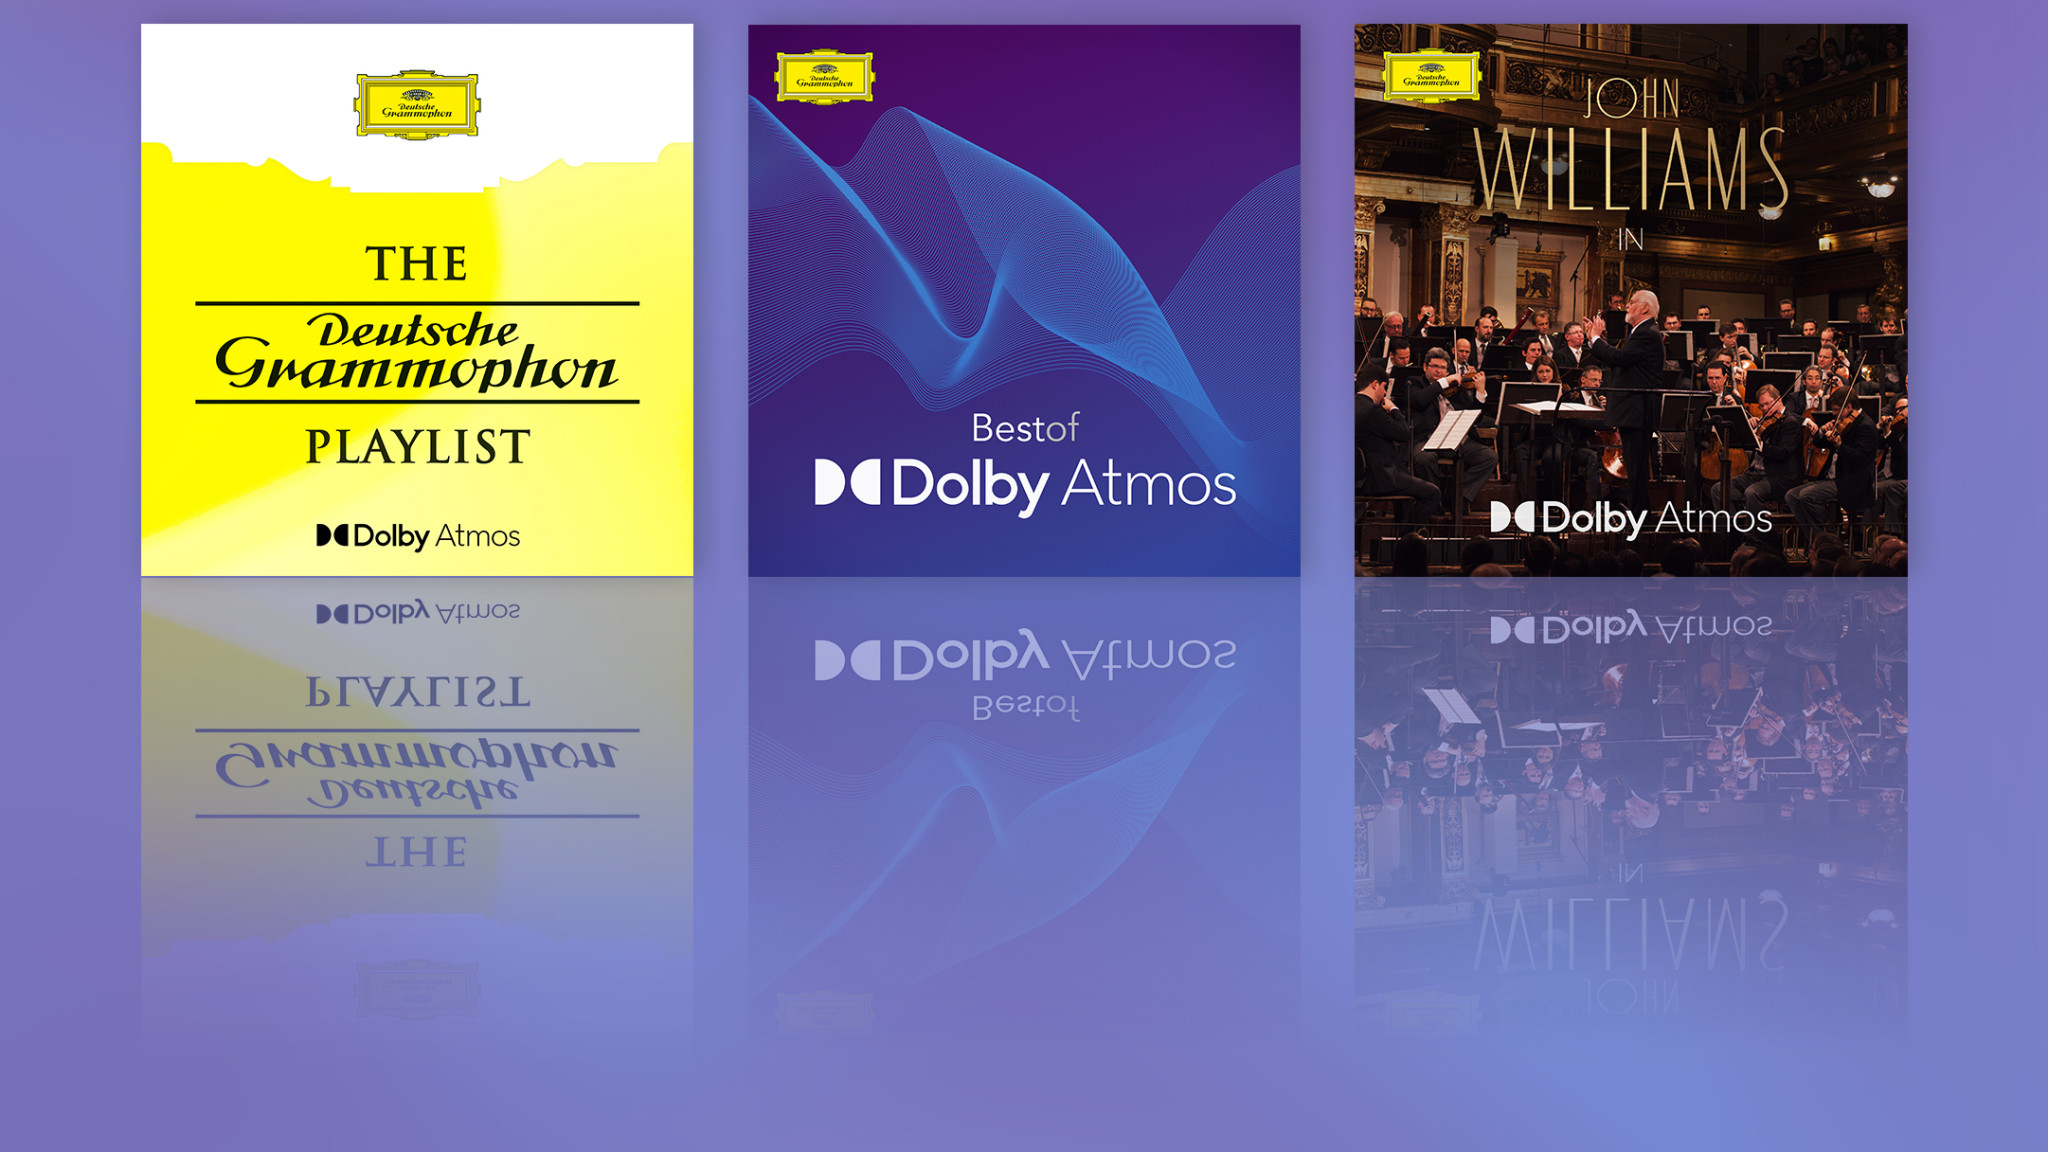 Apple Music Spatial Audio - Three playlists celebrating the best of DG in Dolby Atmos®